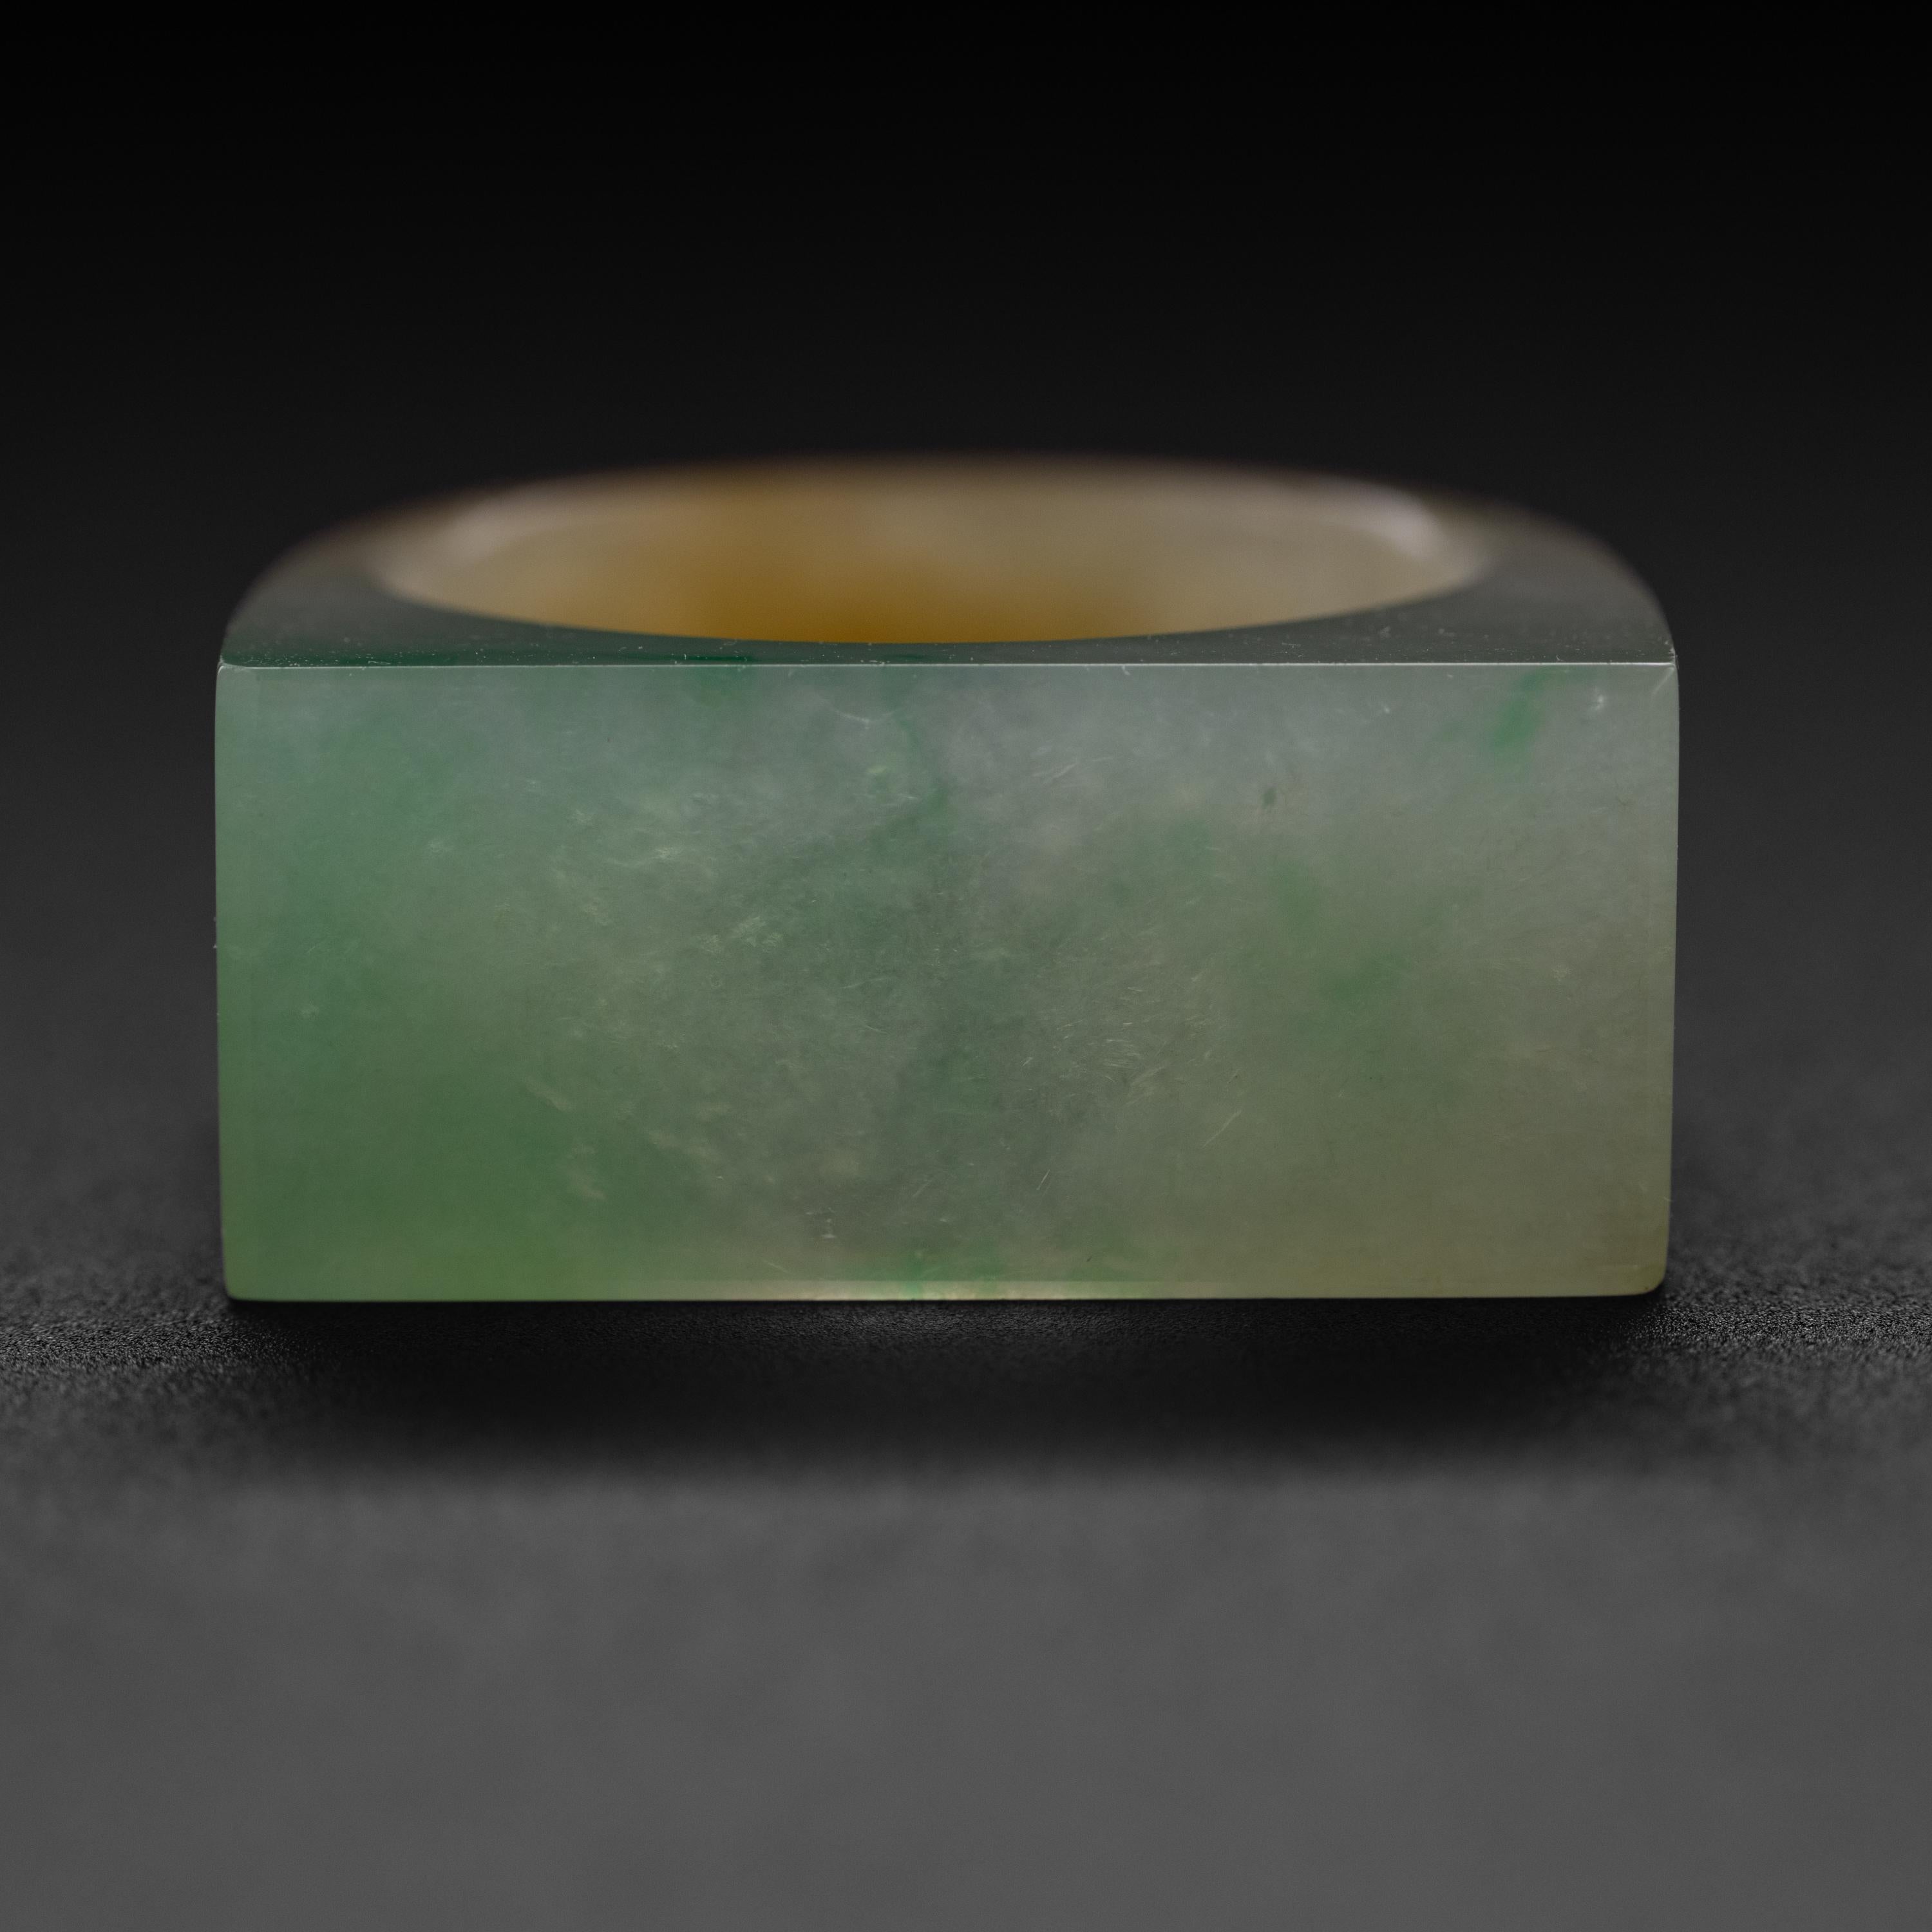 This is a highly translucent hand-carved contemporary jadeite jade ring. The green face has been carved with a fine and subtle beveled edge that gives this centuries-old style of ring a decidedly modern aesthetic. 

The ring displays extraordinary